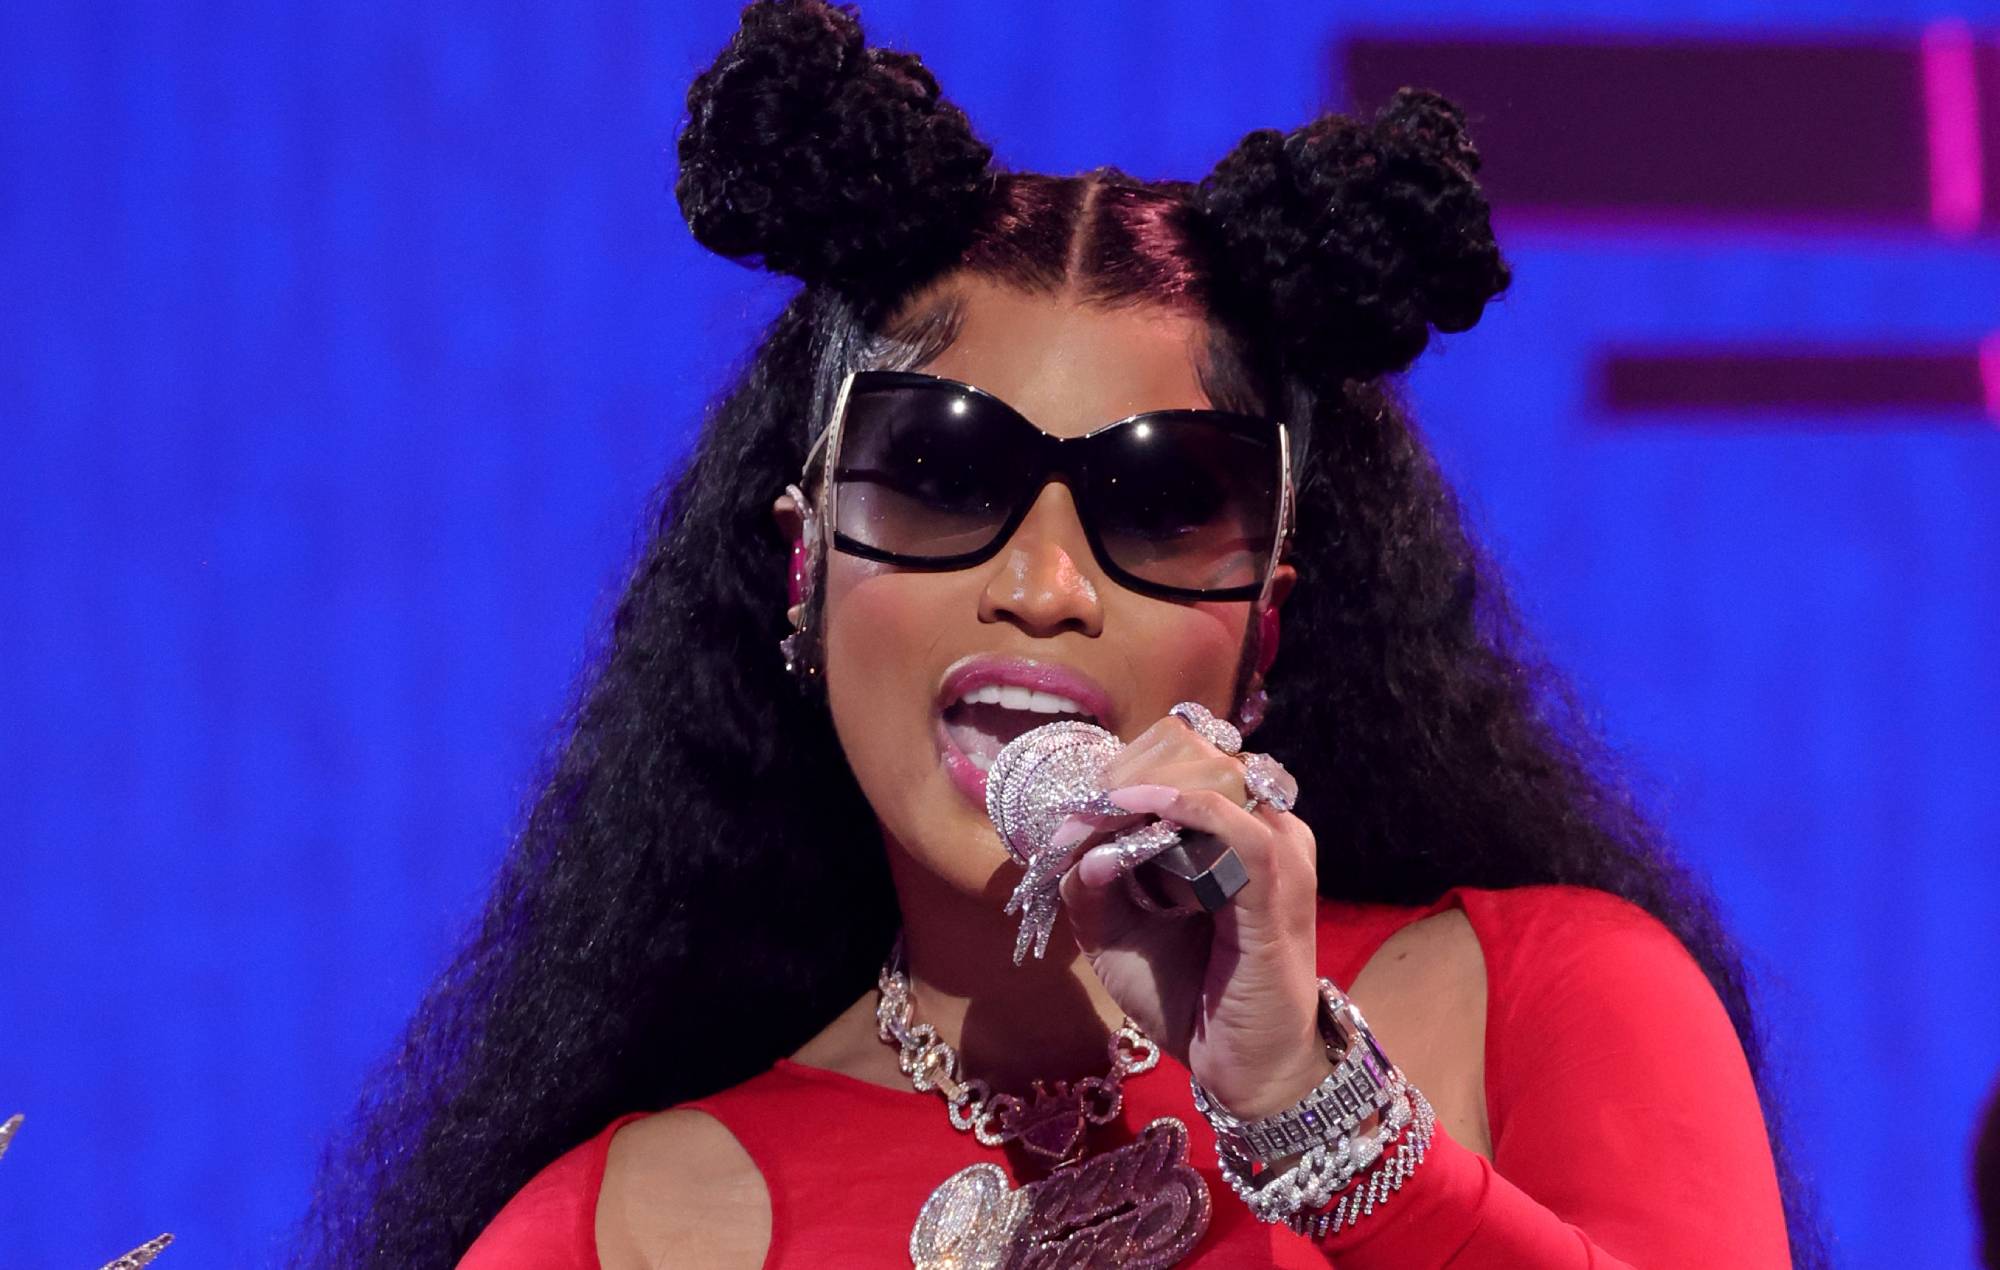 Nicki Minaj teases the upcoming release of four more ‘Pink Friday 2’ songs